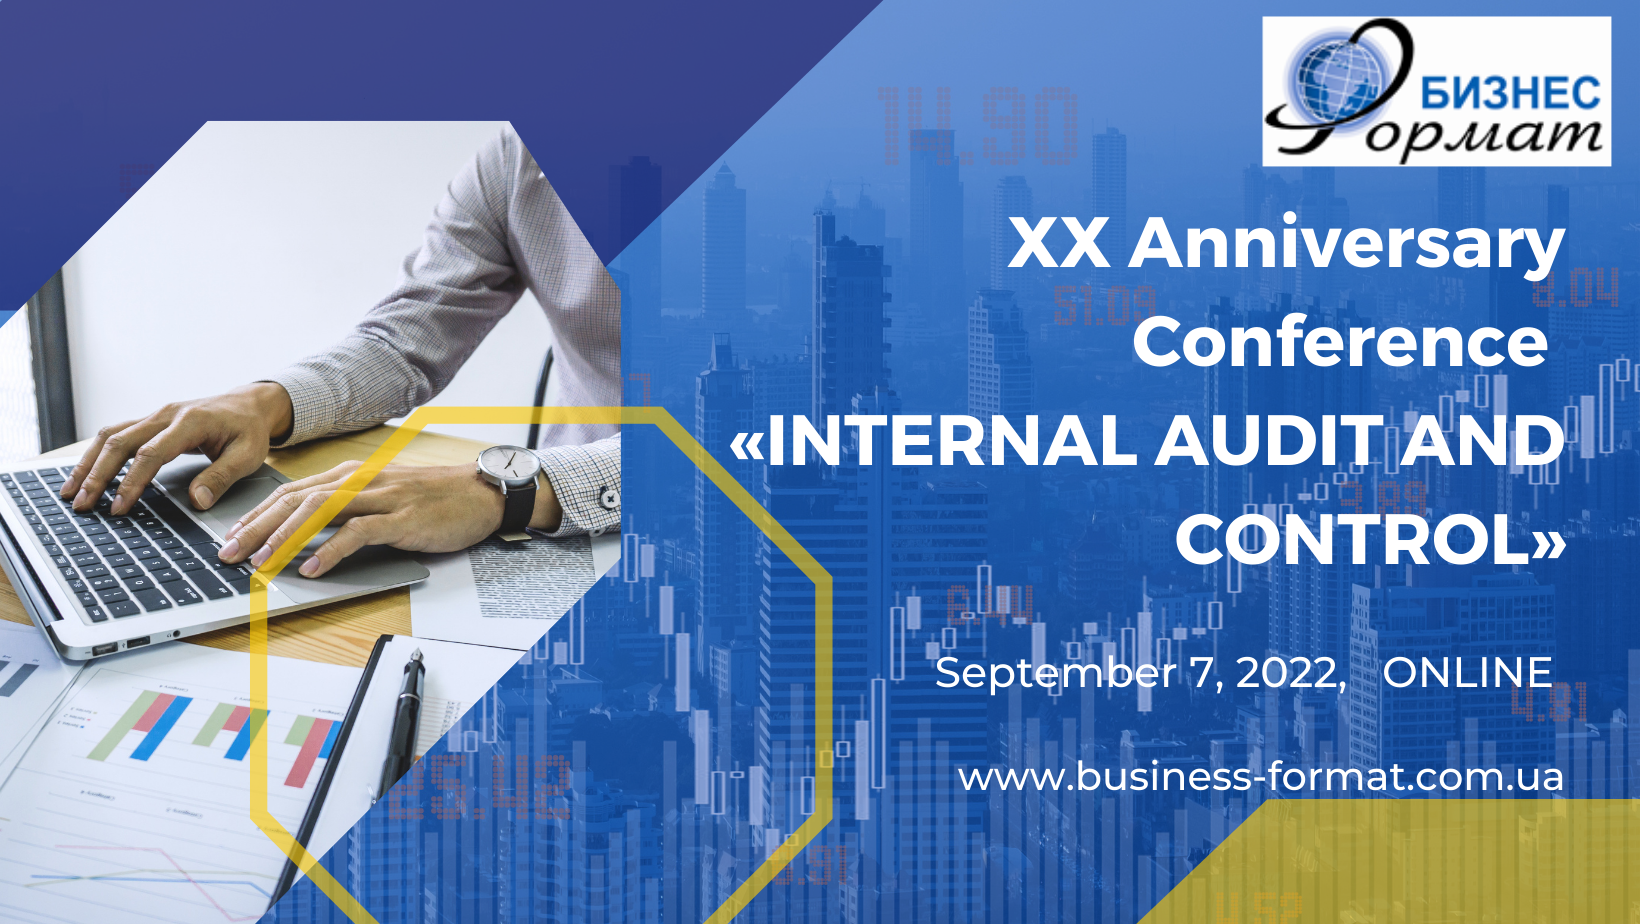 XX Conference “INTERNAL AUDIT AND CONTROL”